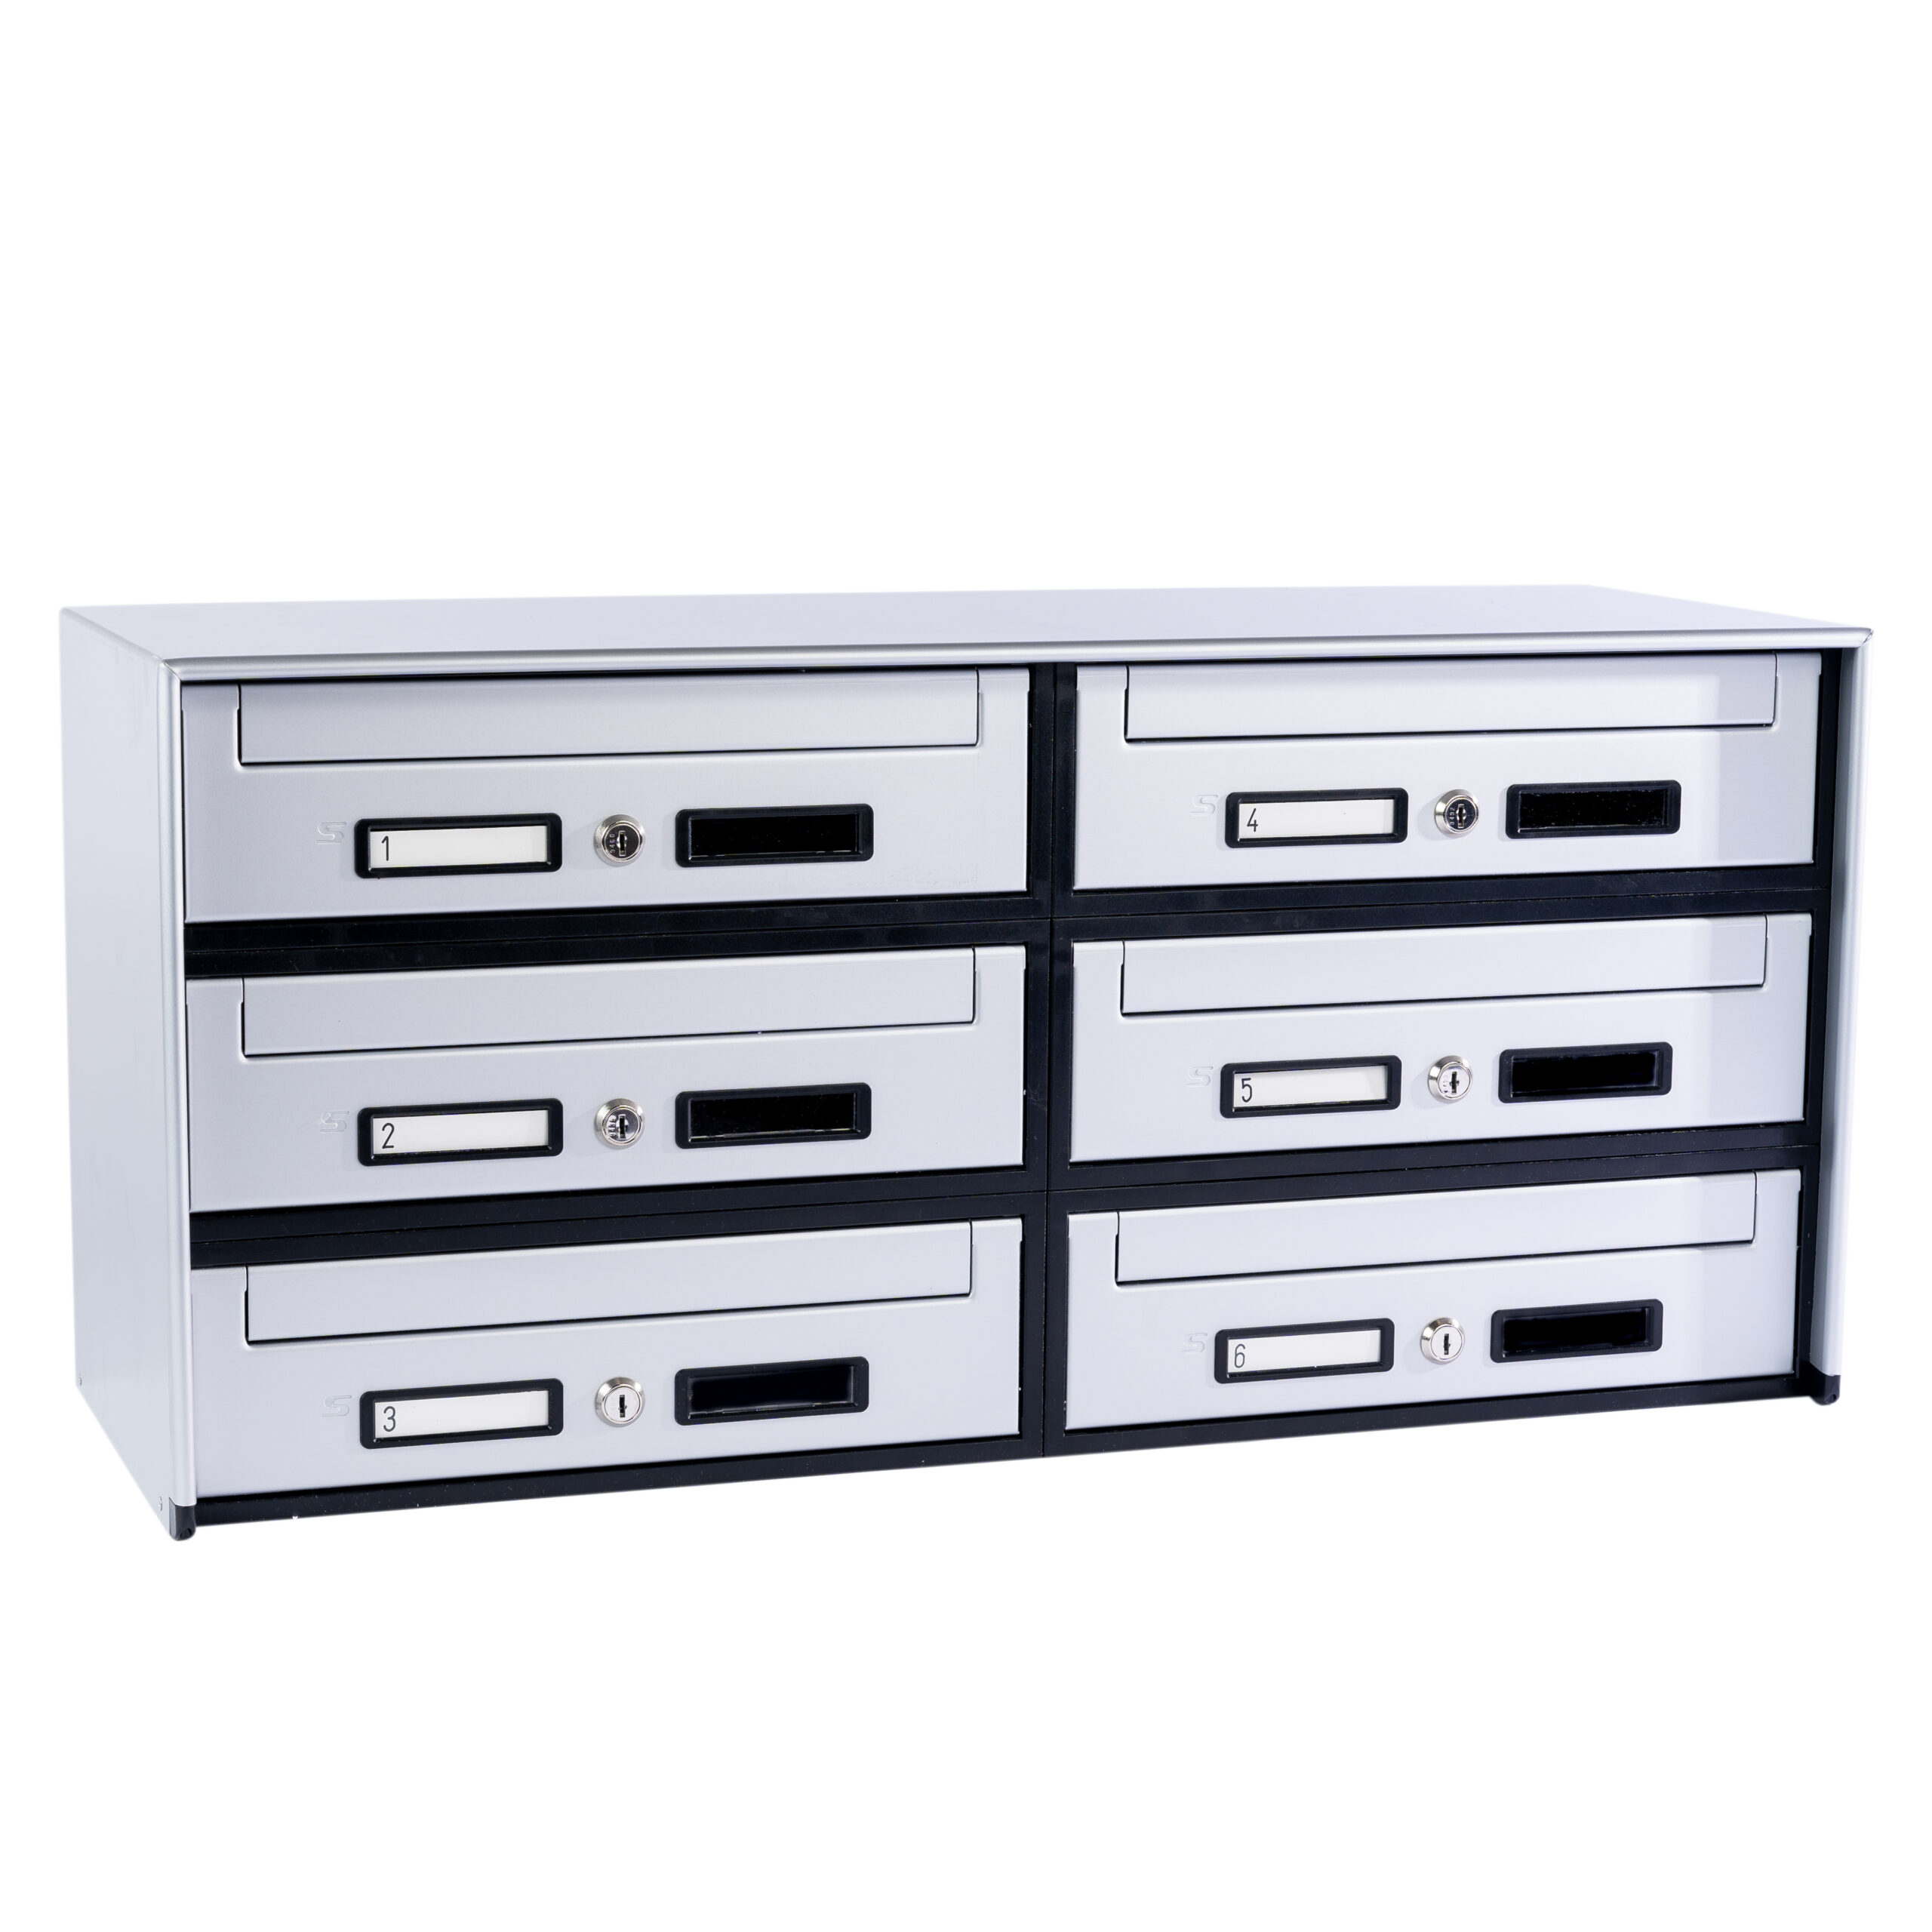 SC5 standard modular letterbox units with front mail collection 6 mailboxes